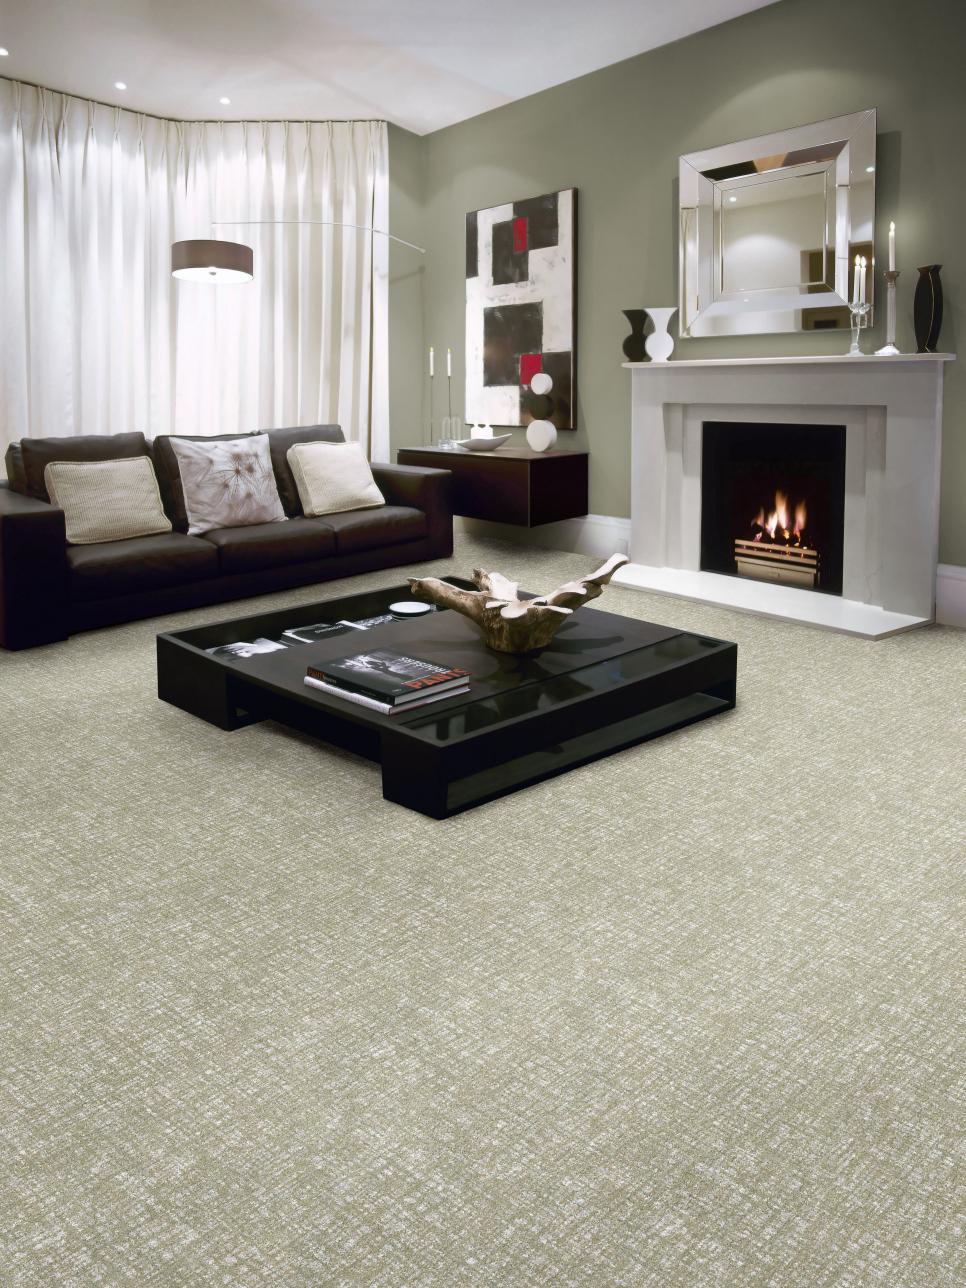 12 Ways to Incorporate Carpet in a Room's Design DIY